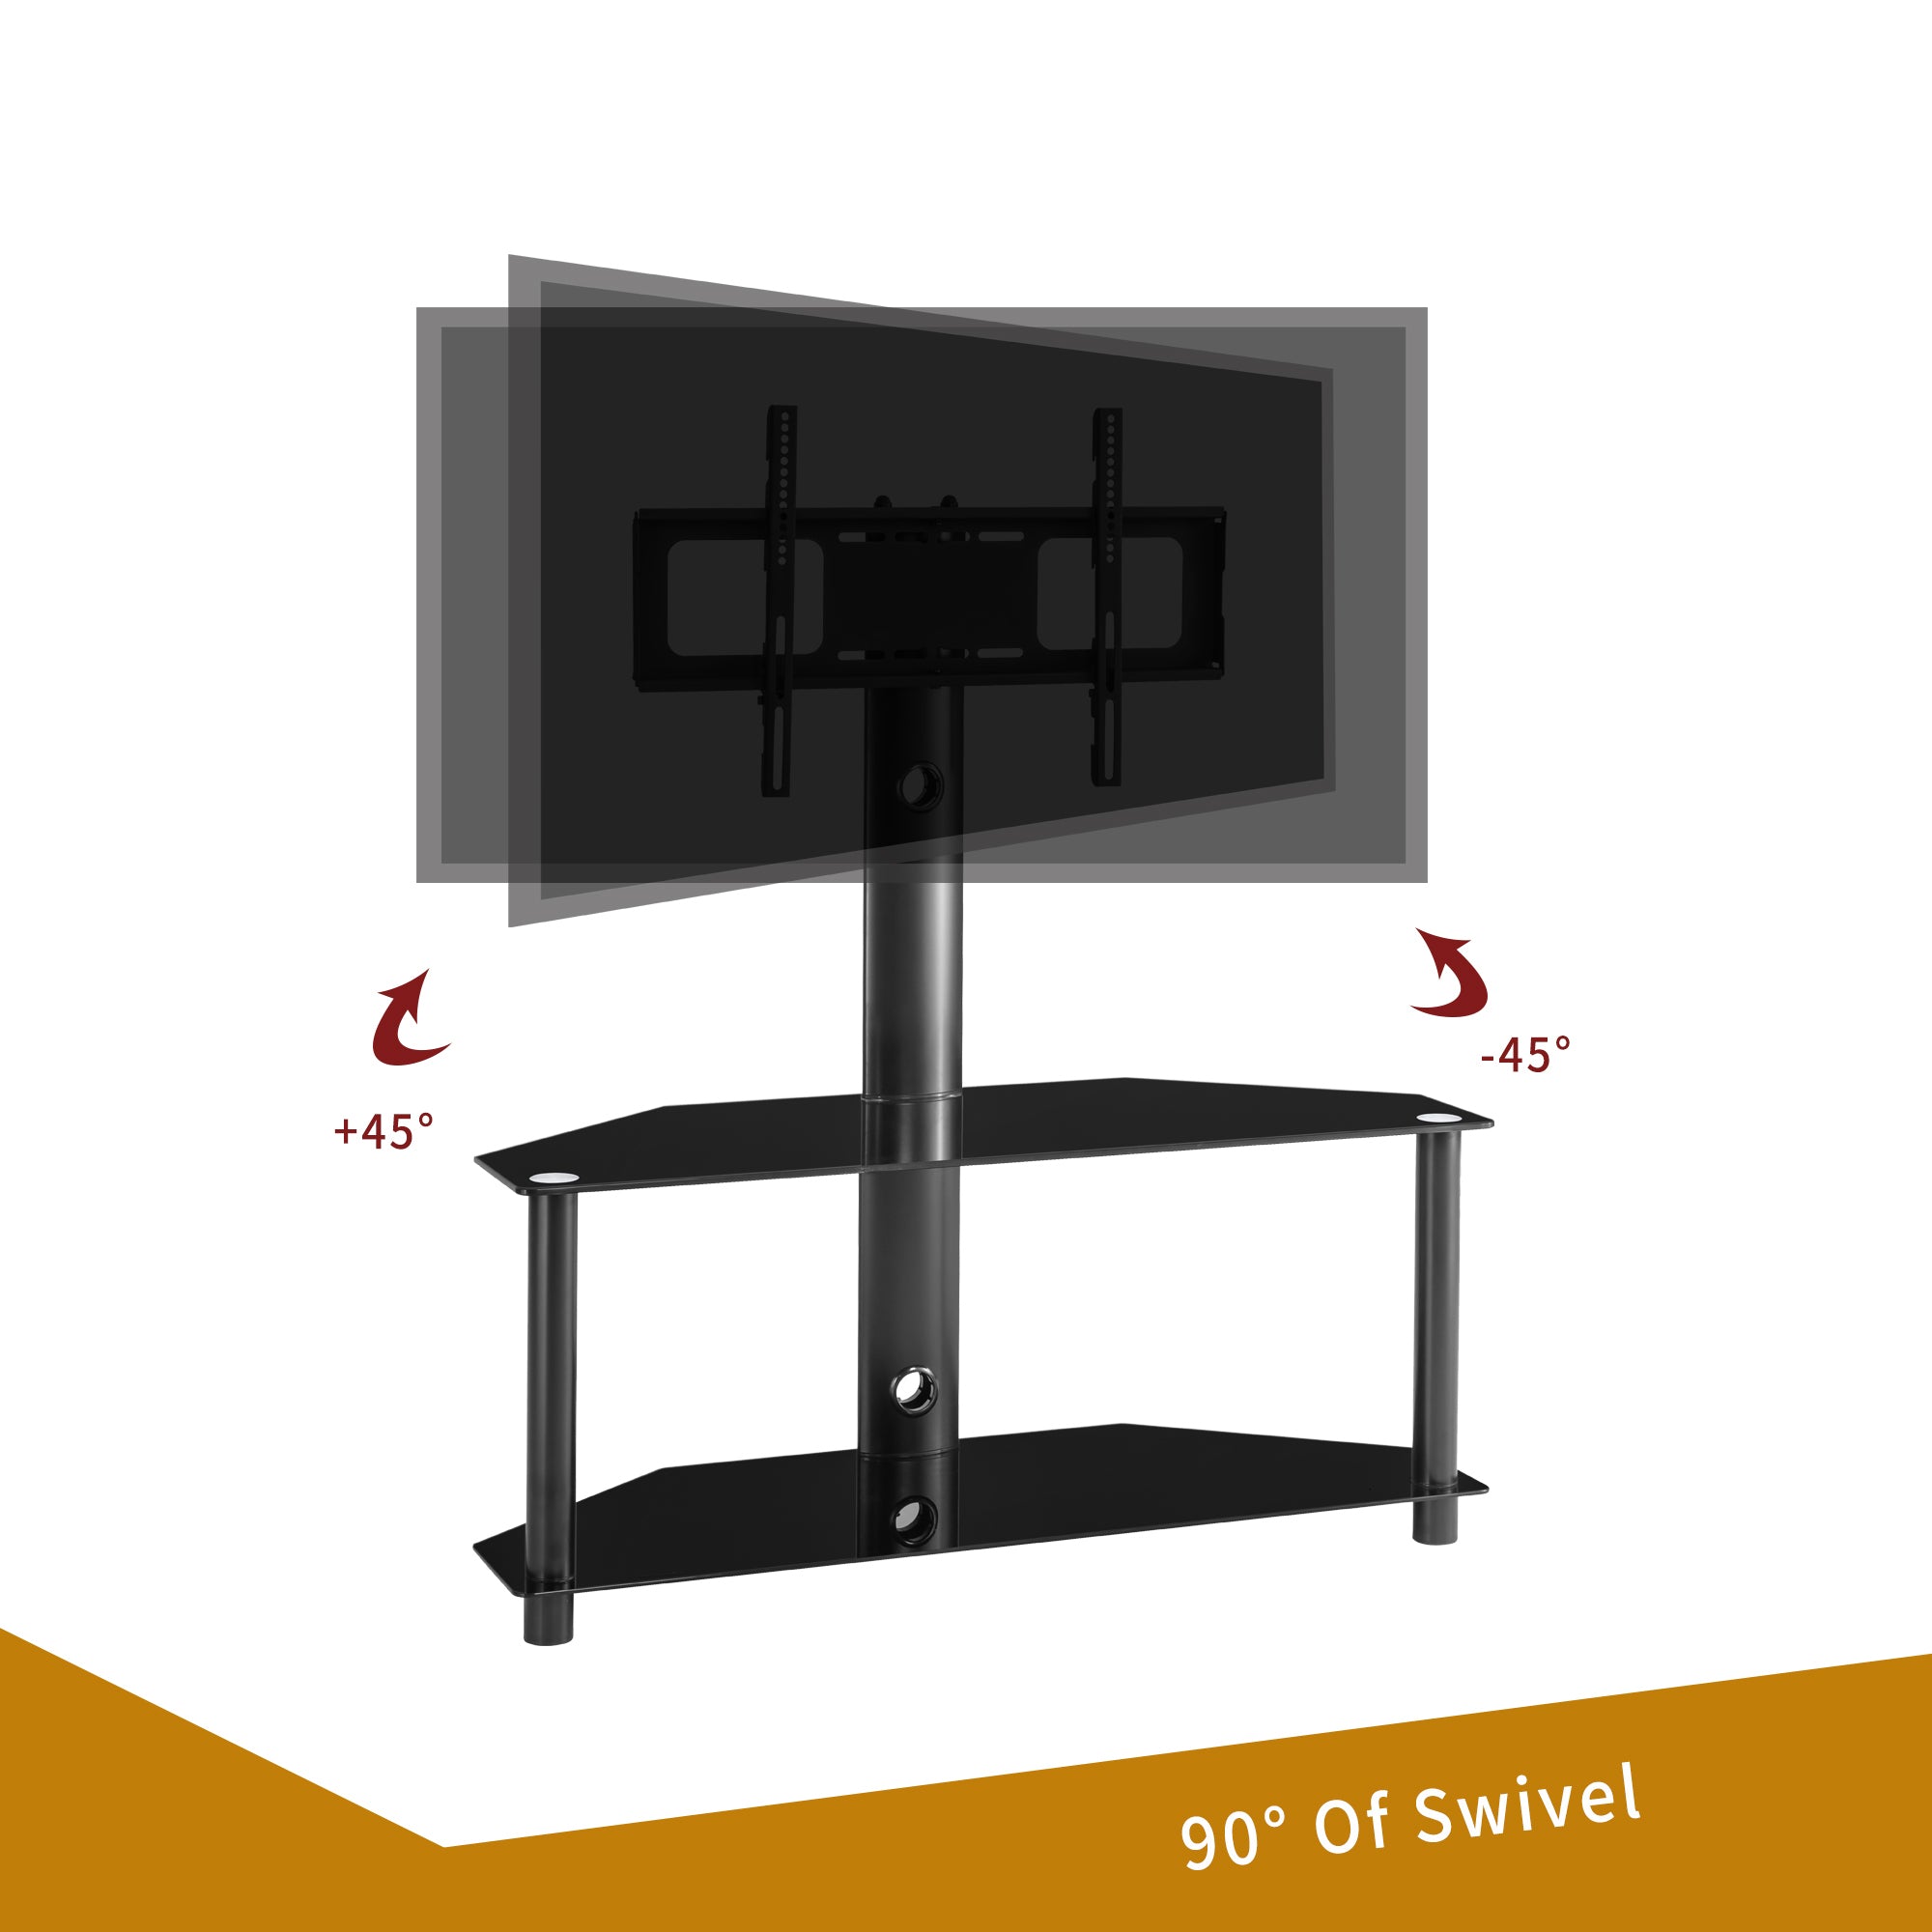 Height And Angle Adjustable Multi-Function Tempered Glass Metal Frame Floor TV Stand, LCD TV Bracket Plasma TV Bracket  2 Tier Tempered Glass Shelves for Multiple Media Devices